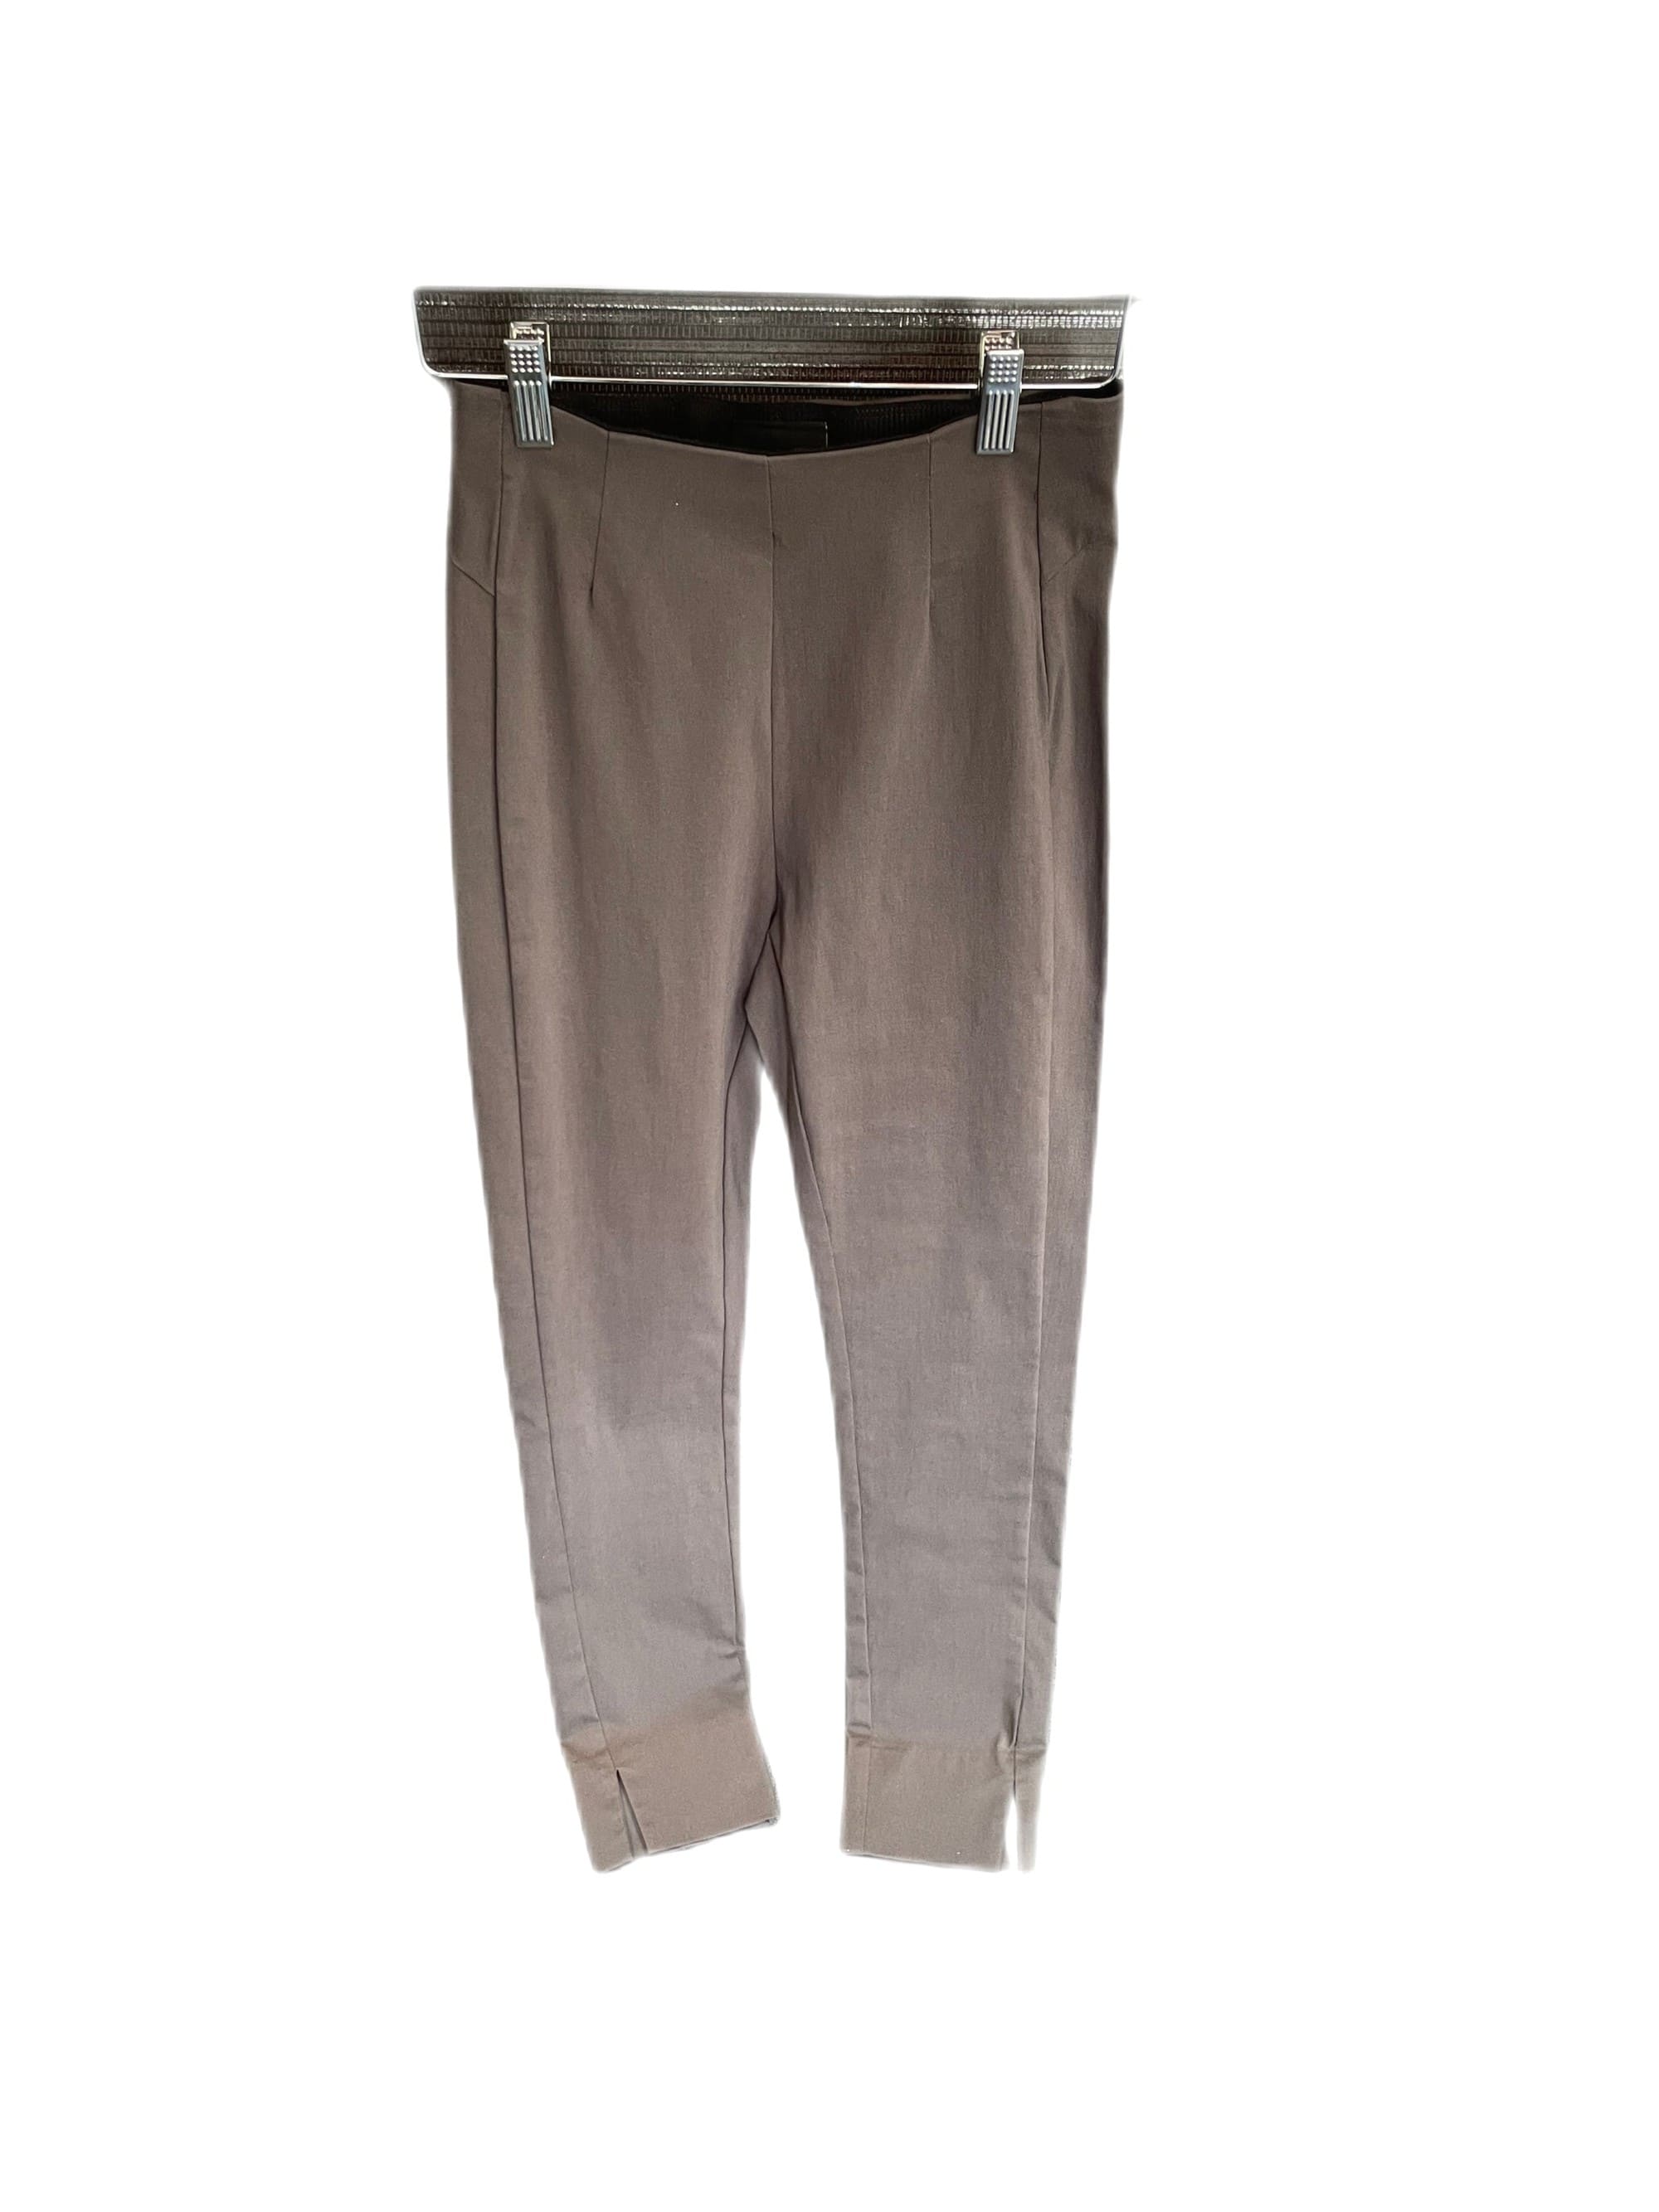 Porto Structured Pant in Charcoal 